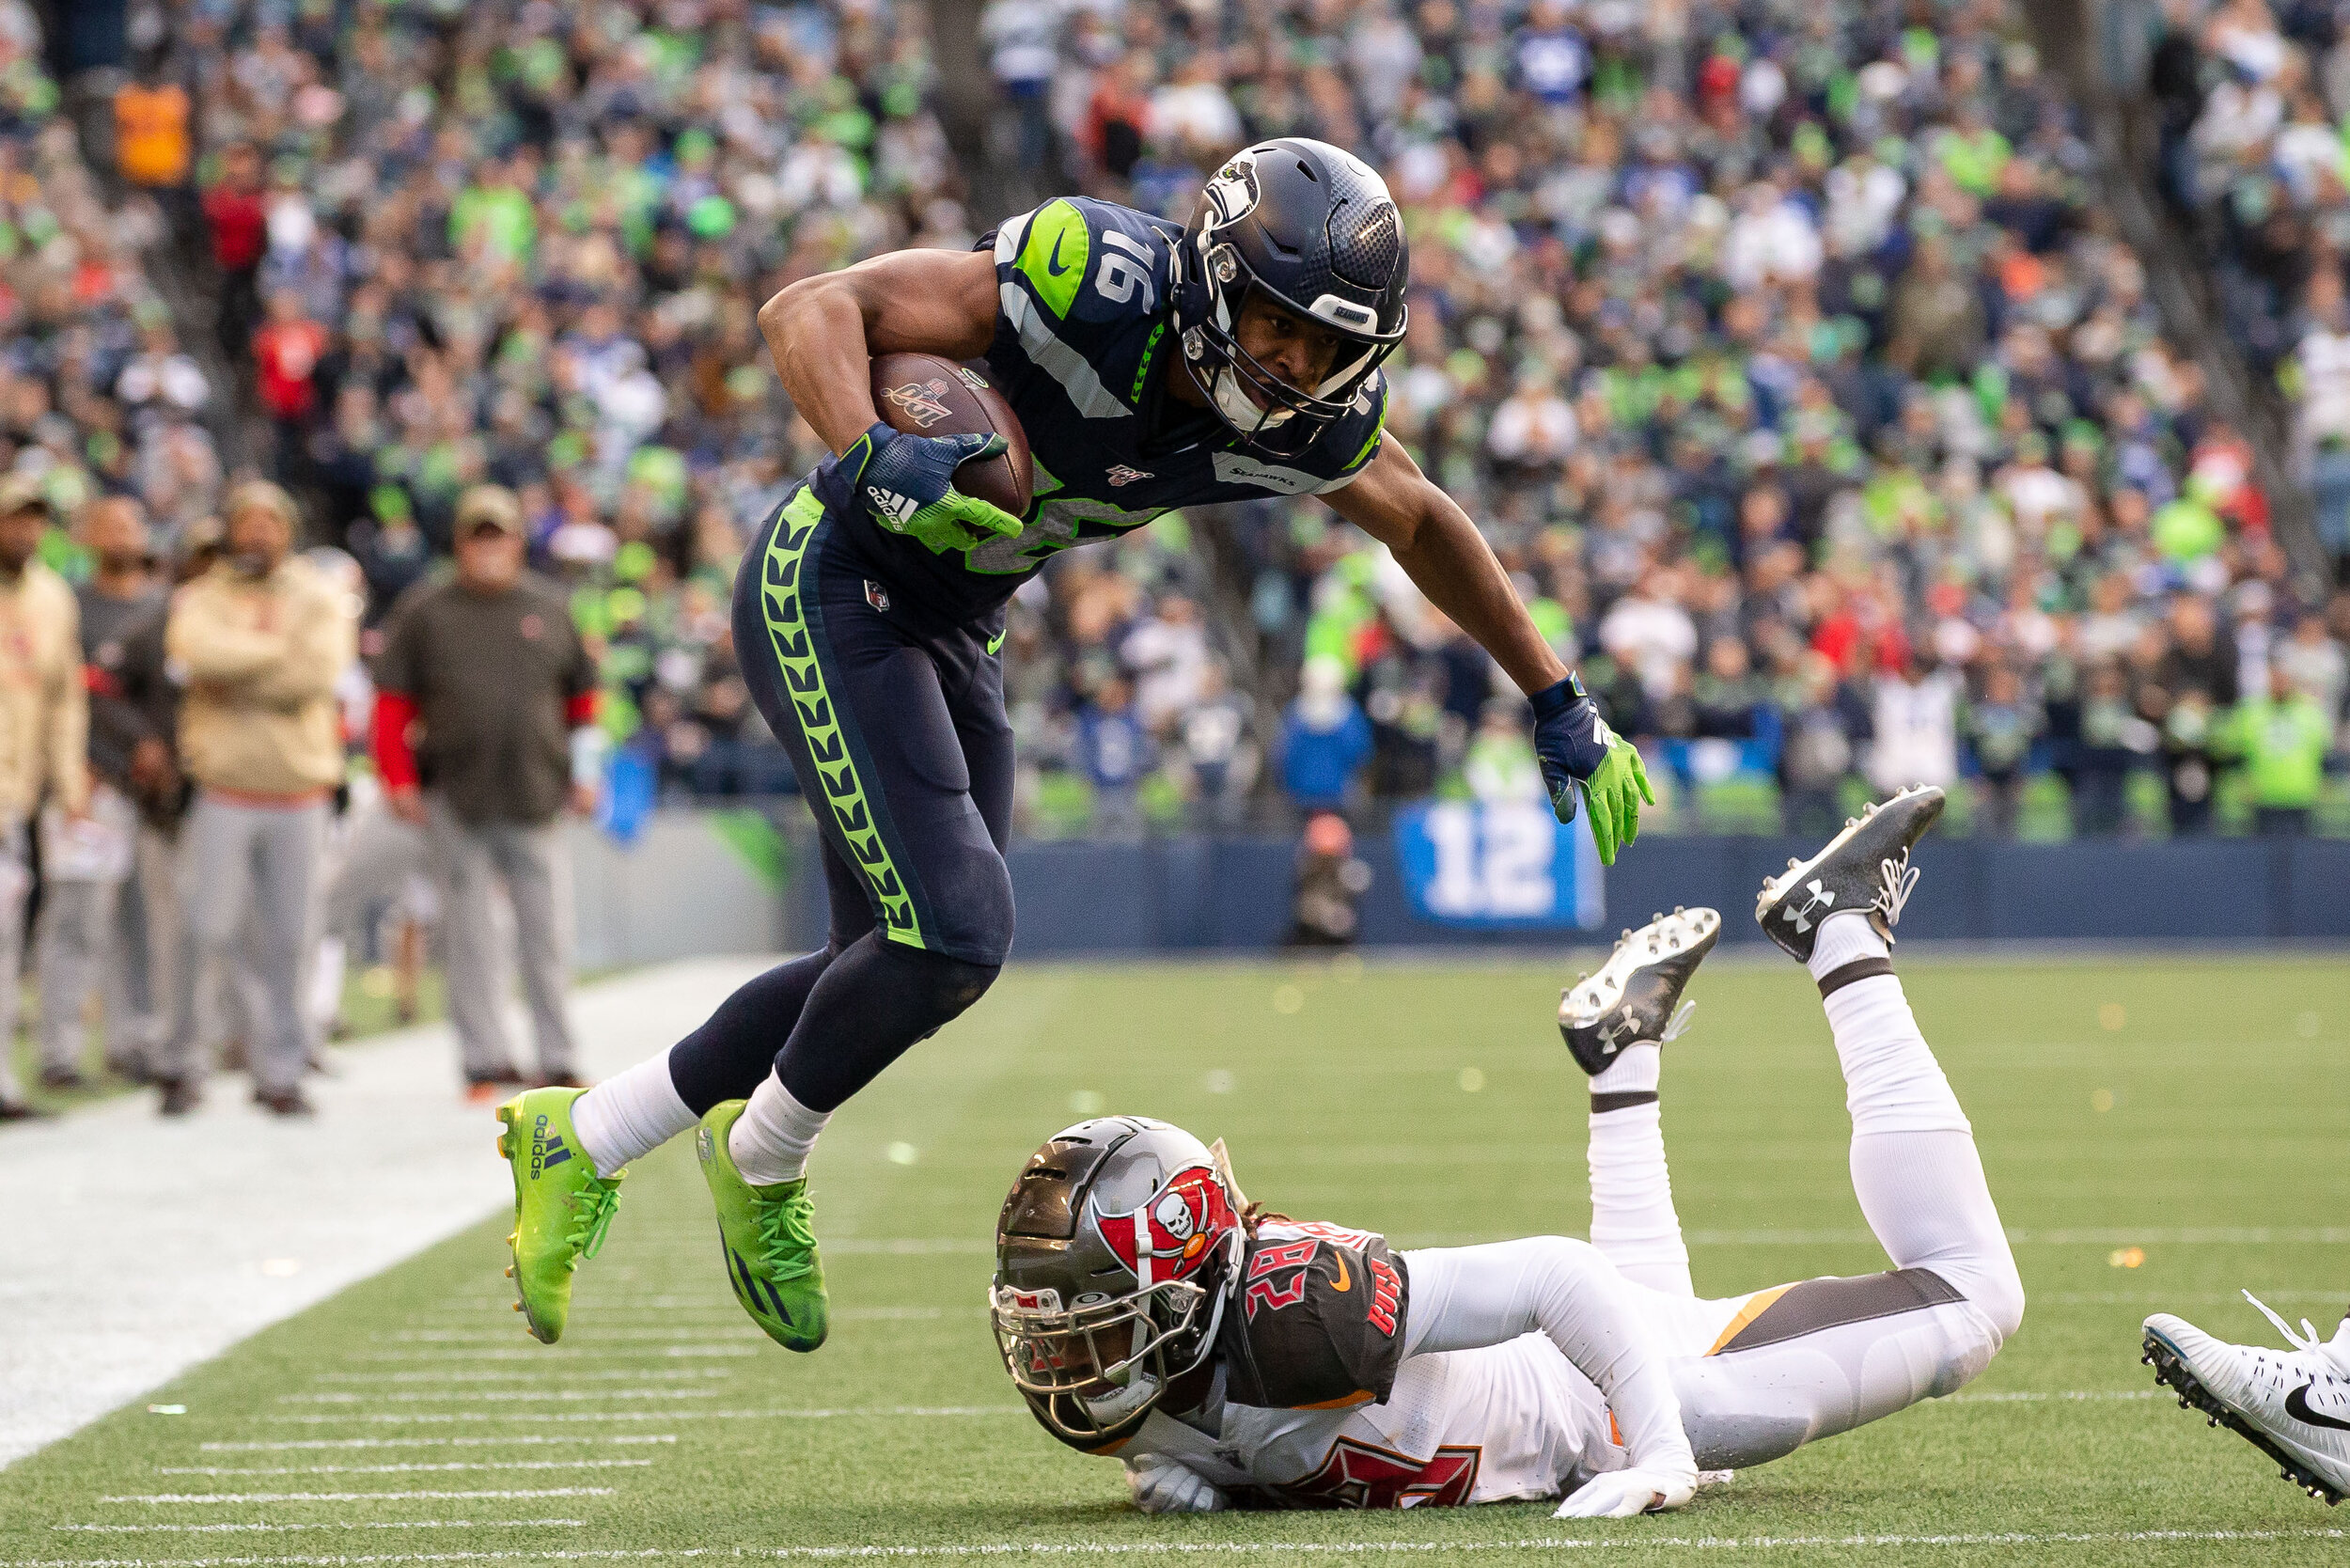  Seattle Seahawks wide receiver Tyler Lockett (16) bounces away from Tampa Bay Buccaneers cornerback Vernon Hargreaves III (28) during the fourth quarter of an NFL football game, Sunday, Nov. 3, 2019, in Seattle. Seattle defeated Tampa Bay 40-34 in o